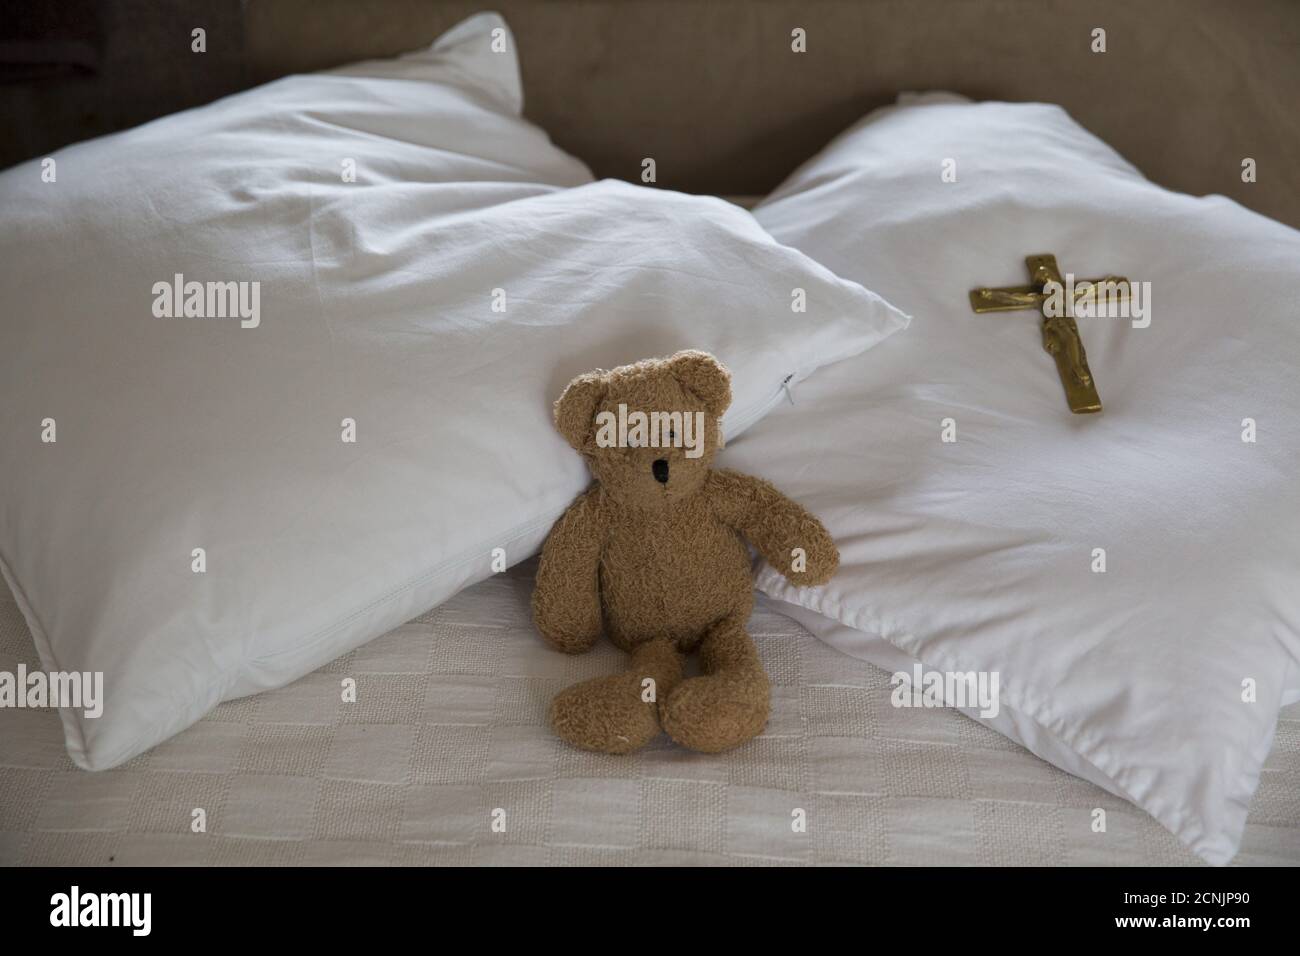 A teddy bear and cross lie on the bed of Sister Rachel Denton at St Cuthbert's Hermitage in Lincolnshire, north east Britain August 24, 2015. Denton, a Catholic hermit, rises early to tend to her vegetable garden, feed her cats and pray. But the former Carmelite nun, who in 2006 pledged to live the rest of her life in solitude, has another chore - to update her Twitter account and check Facebook. 'The myth you often face as a hermit is that you should have a beard and live in a cave. None of which is me,' says the ex-teacher. For the modern-day hermit, she says social media is vital: 'tweets a Stock Photo